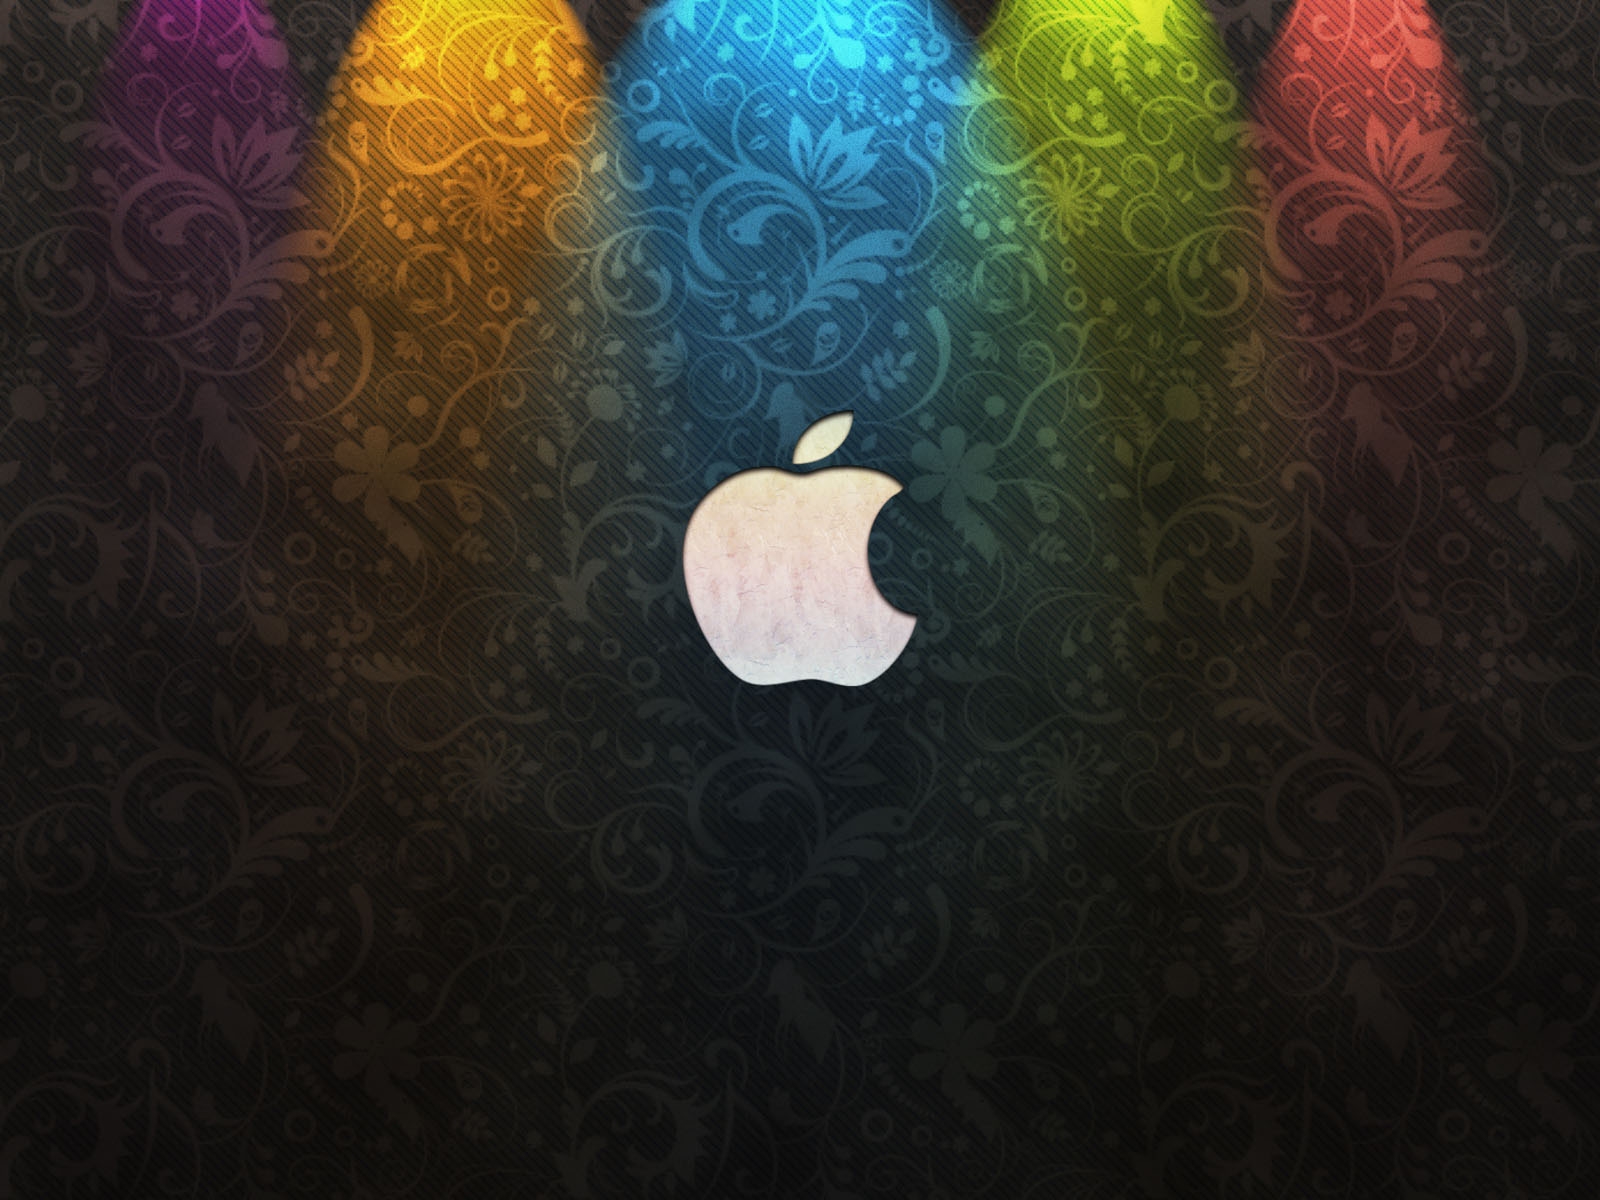 Apple Logo and Flower Background for 1600 x 1200 resolution